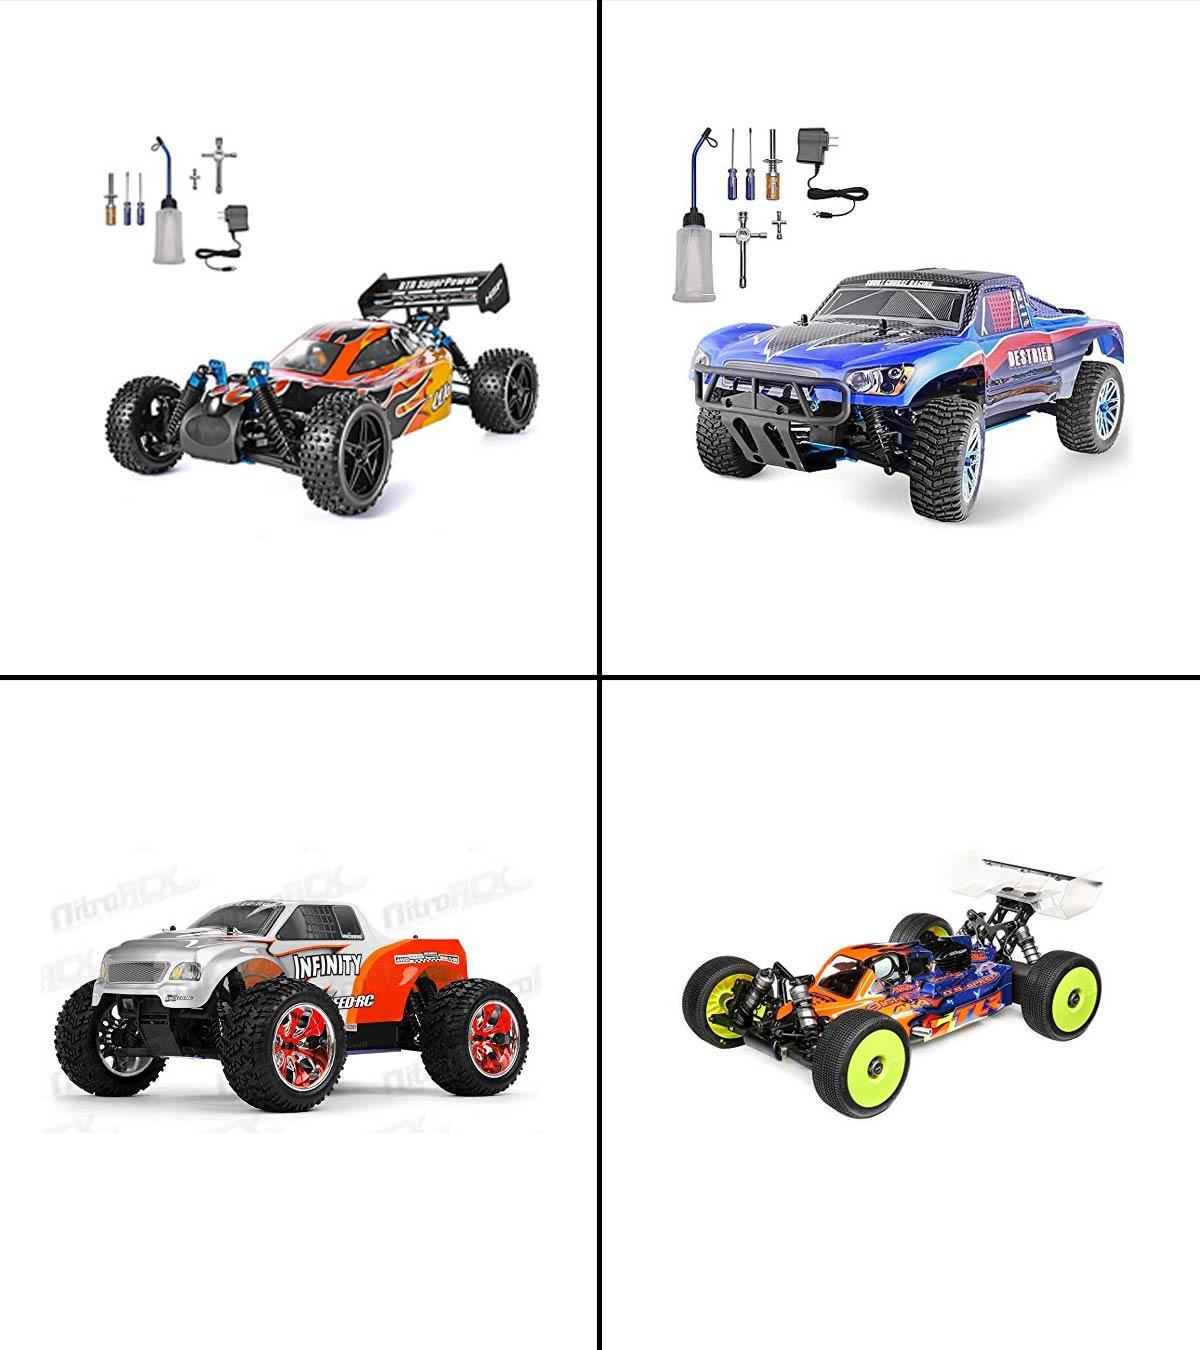 Nitro Remote Control Cars For Sale: Considering Nitro RC Cars: Features to Keep in Mind When Shopping.